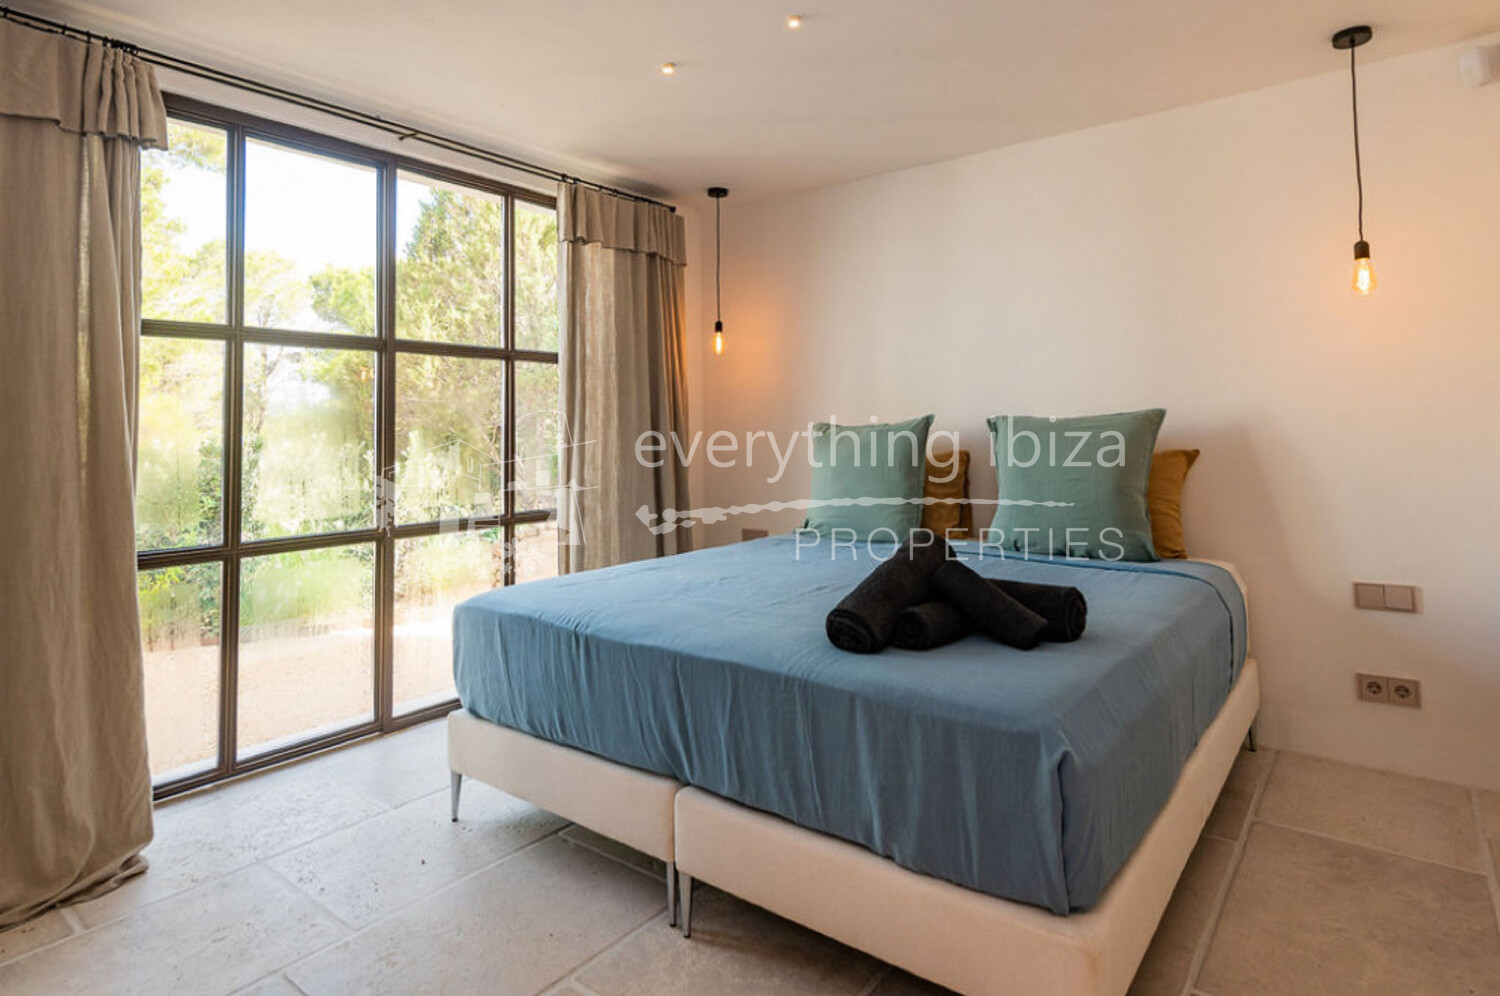 Beautifully Renovated Country House with Sea and Sunset Views, ref. 1655, for sale in Ibiza by everything ibiza Properties